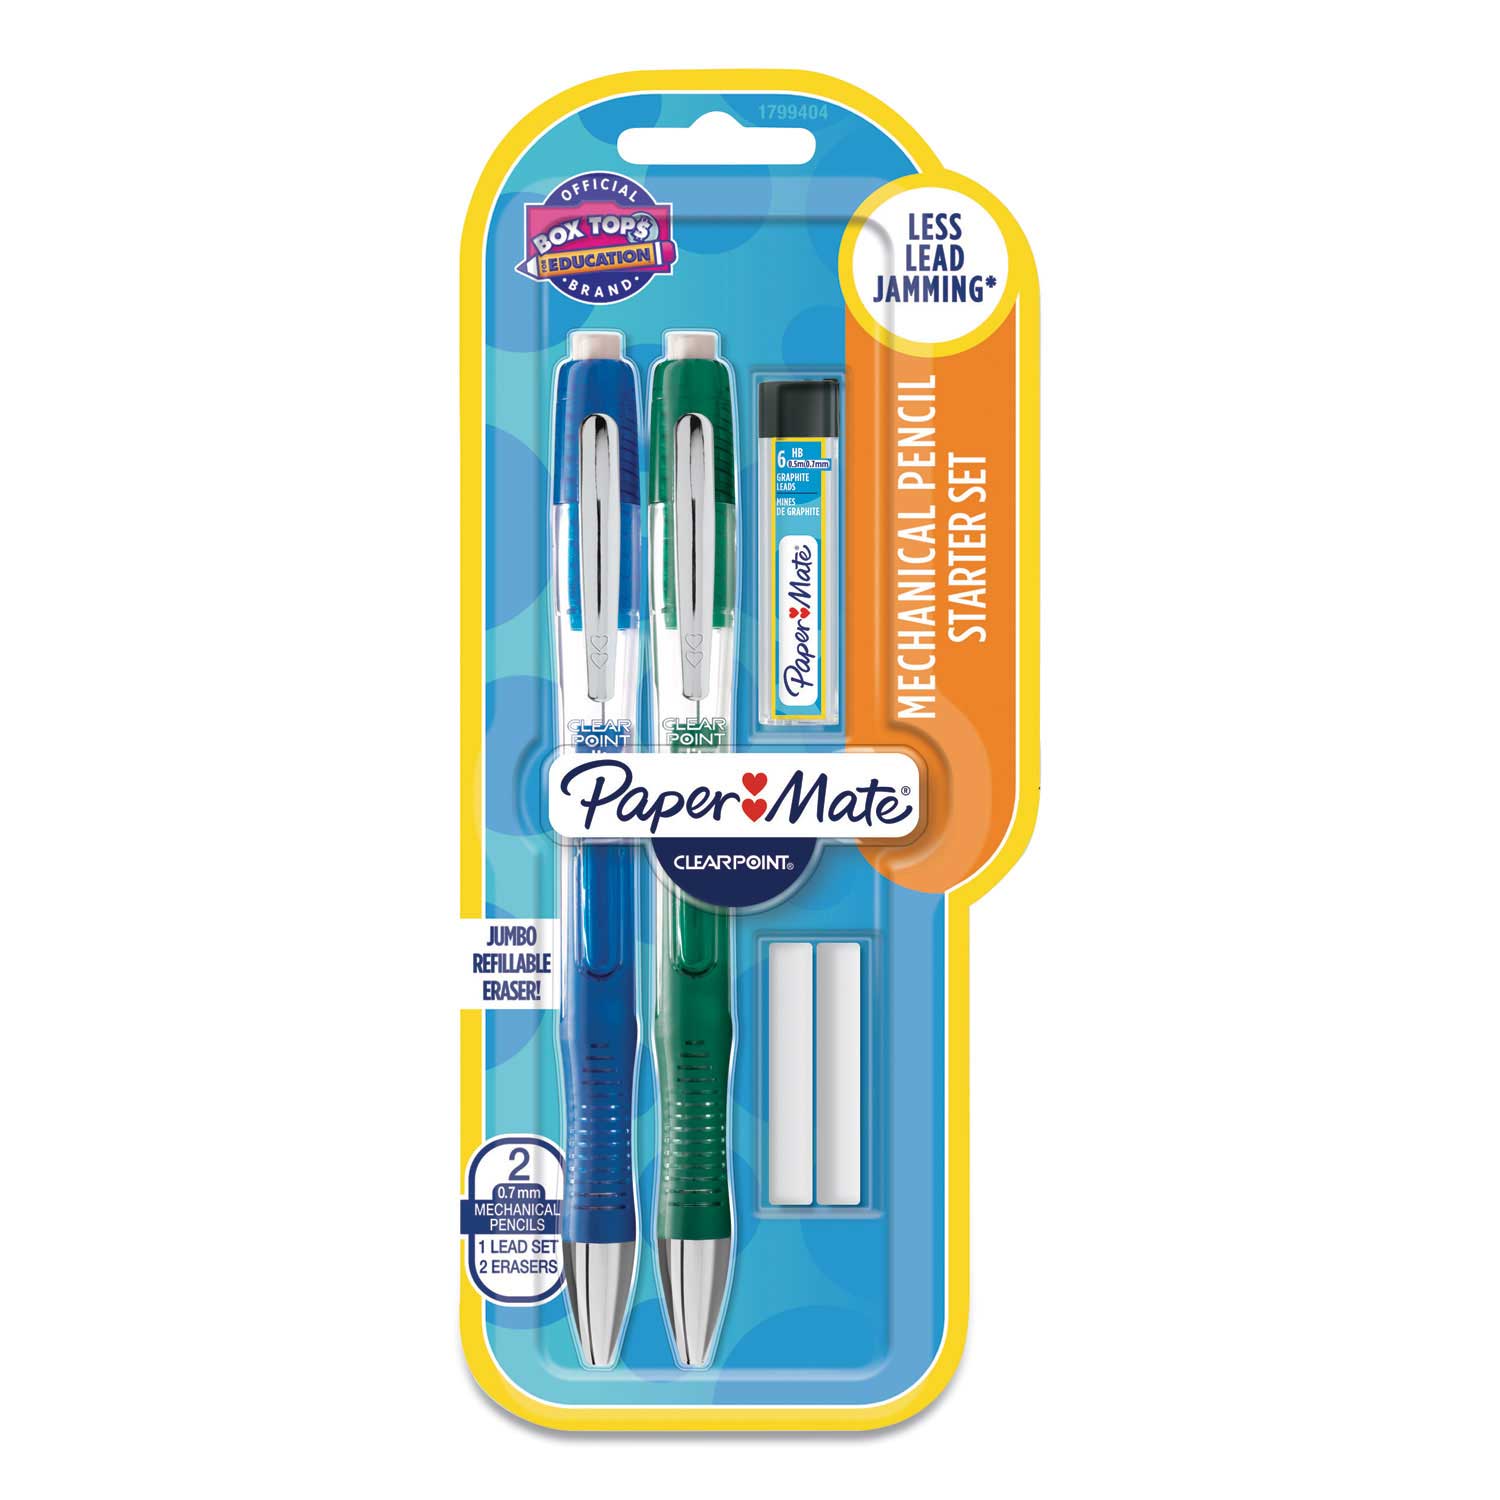 Paper Mate 0.7 mm Black Lead Blue and Green Barrel Clearpoint Elite  Mechanical Pencil - 2 count